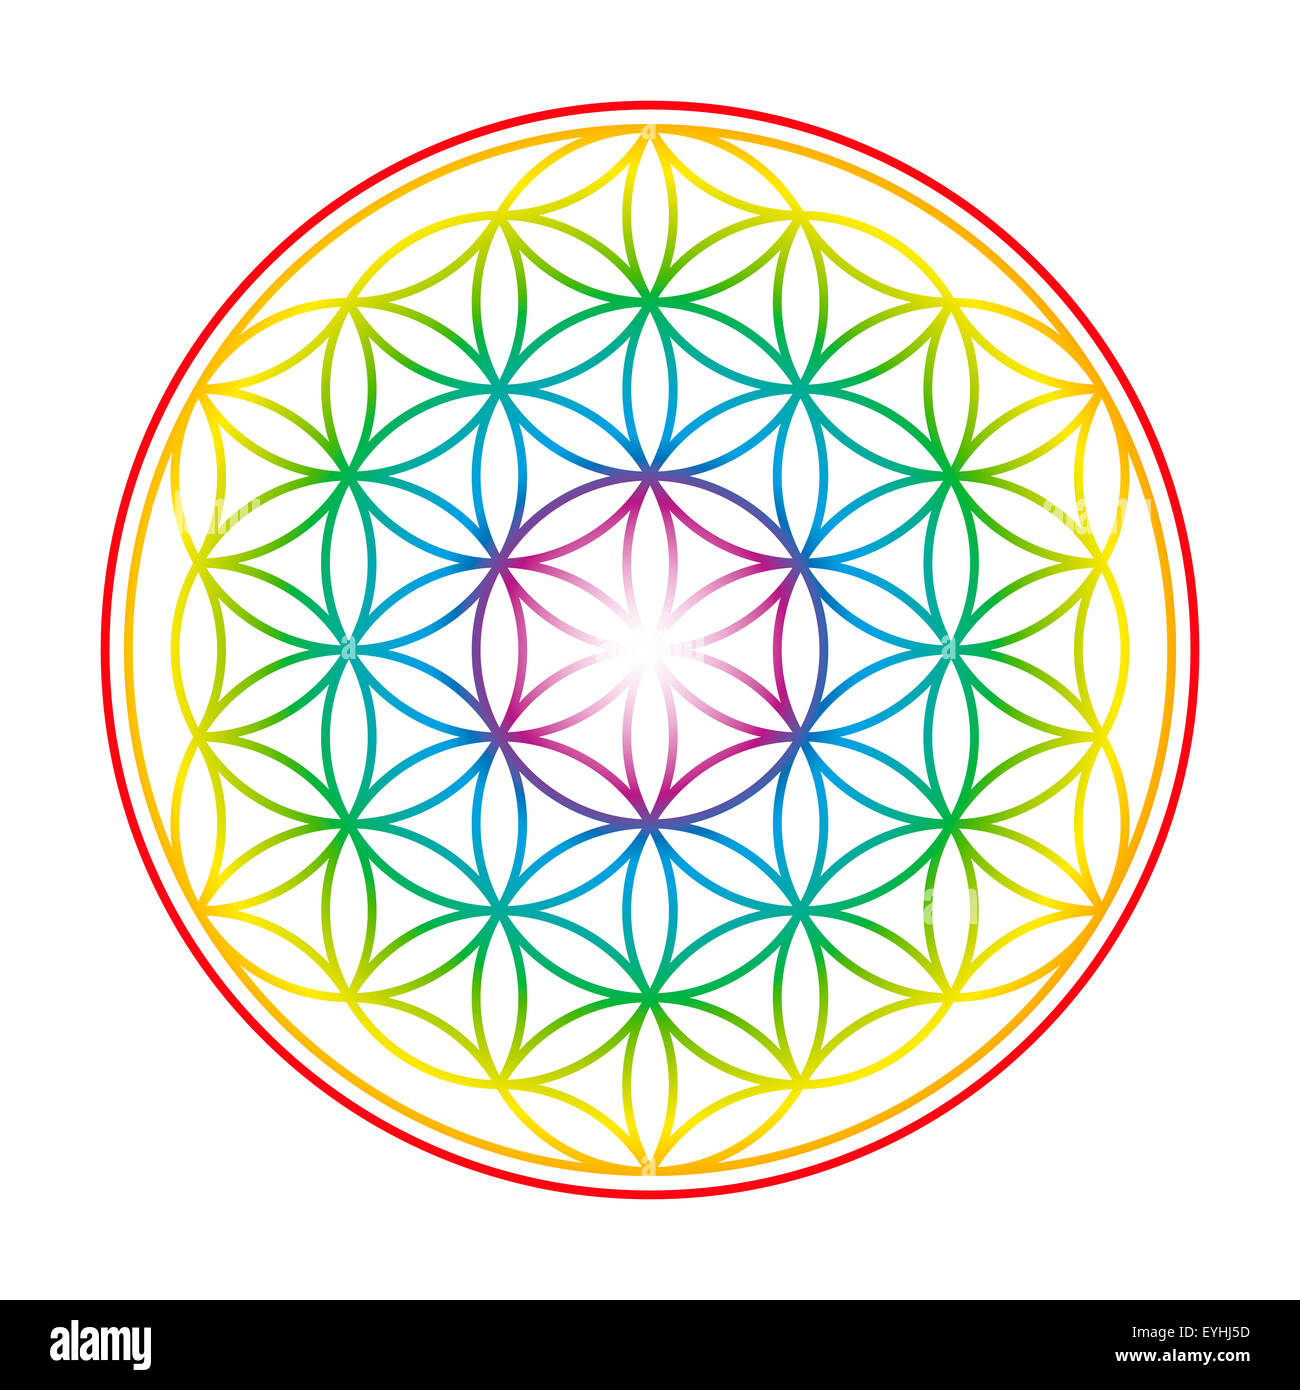 Flower of Life shown as an gently glowing rainbow colored symbol of harmony. Illustration on white background. Stock Photo